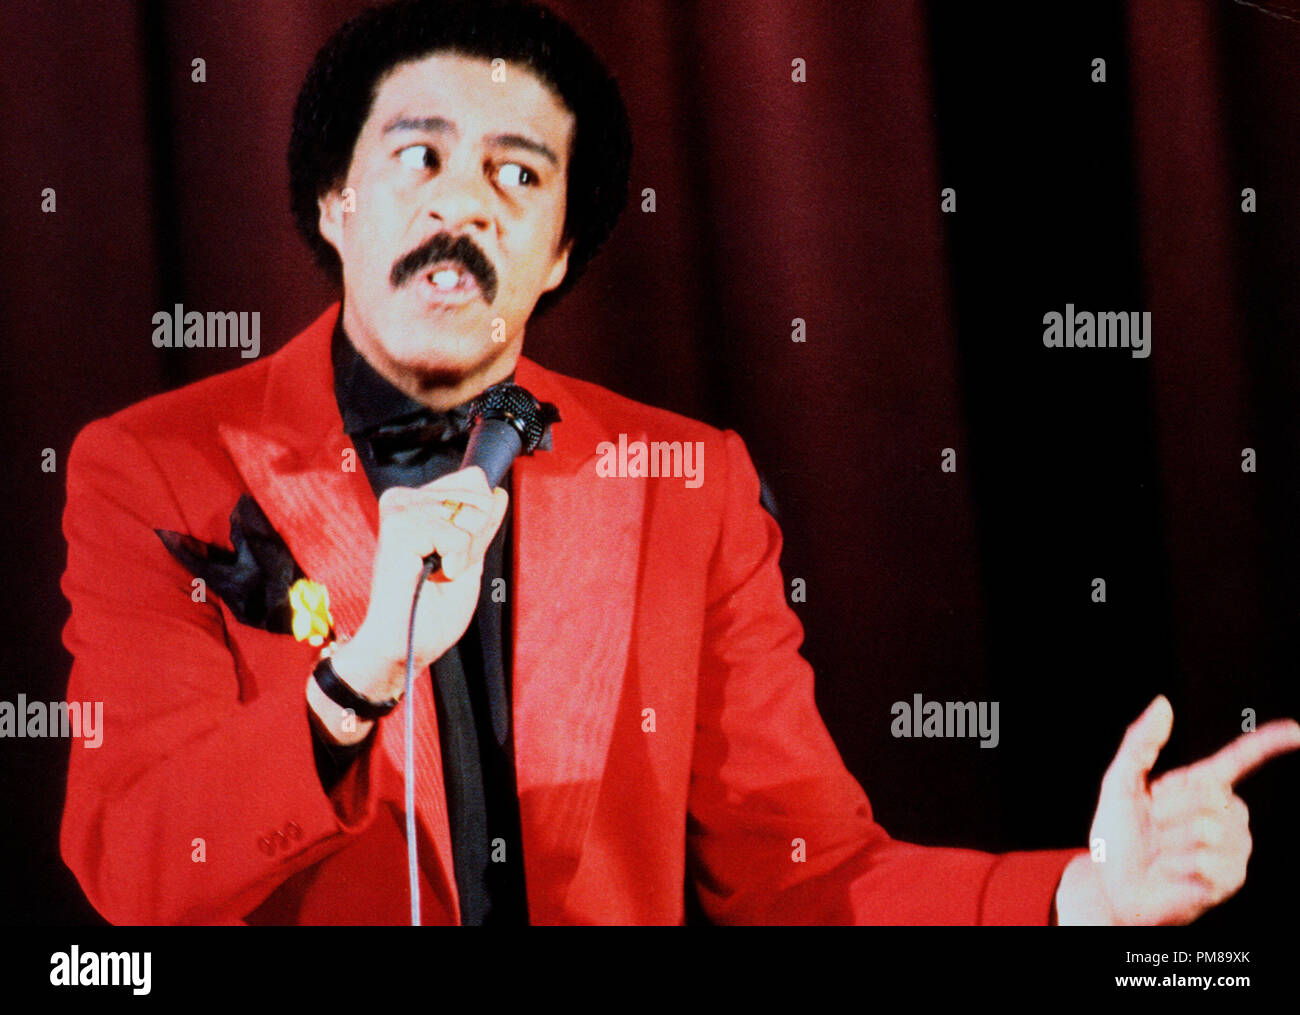 Studio Publicity Still from 'Richard Pryor Live on the Sunset Strip' Richard Pryor © 1982 Columbia Pictures All Rights Reserved   File Reference # 31710126THA  For Editorial Use Only Stock Photo